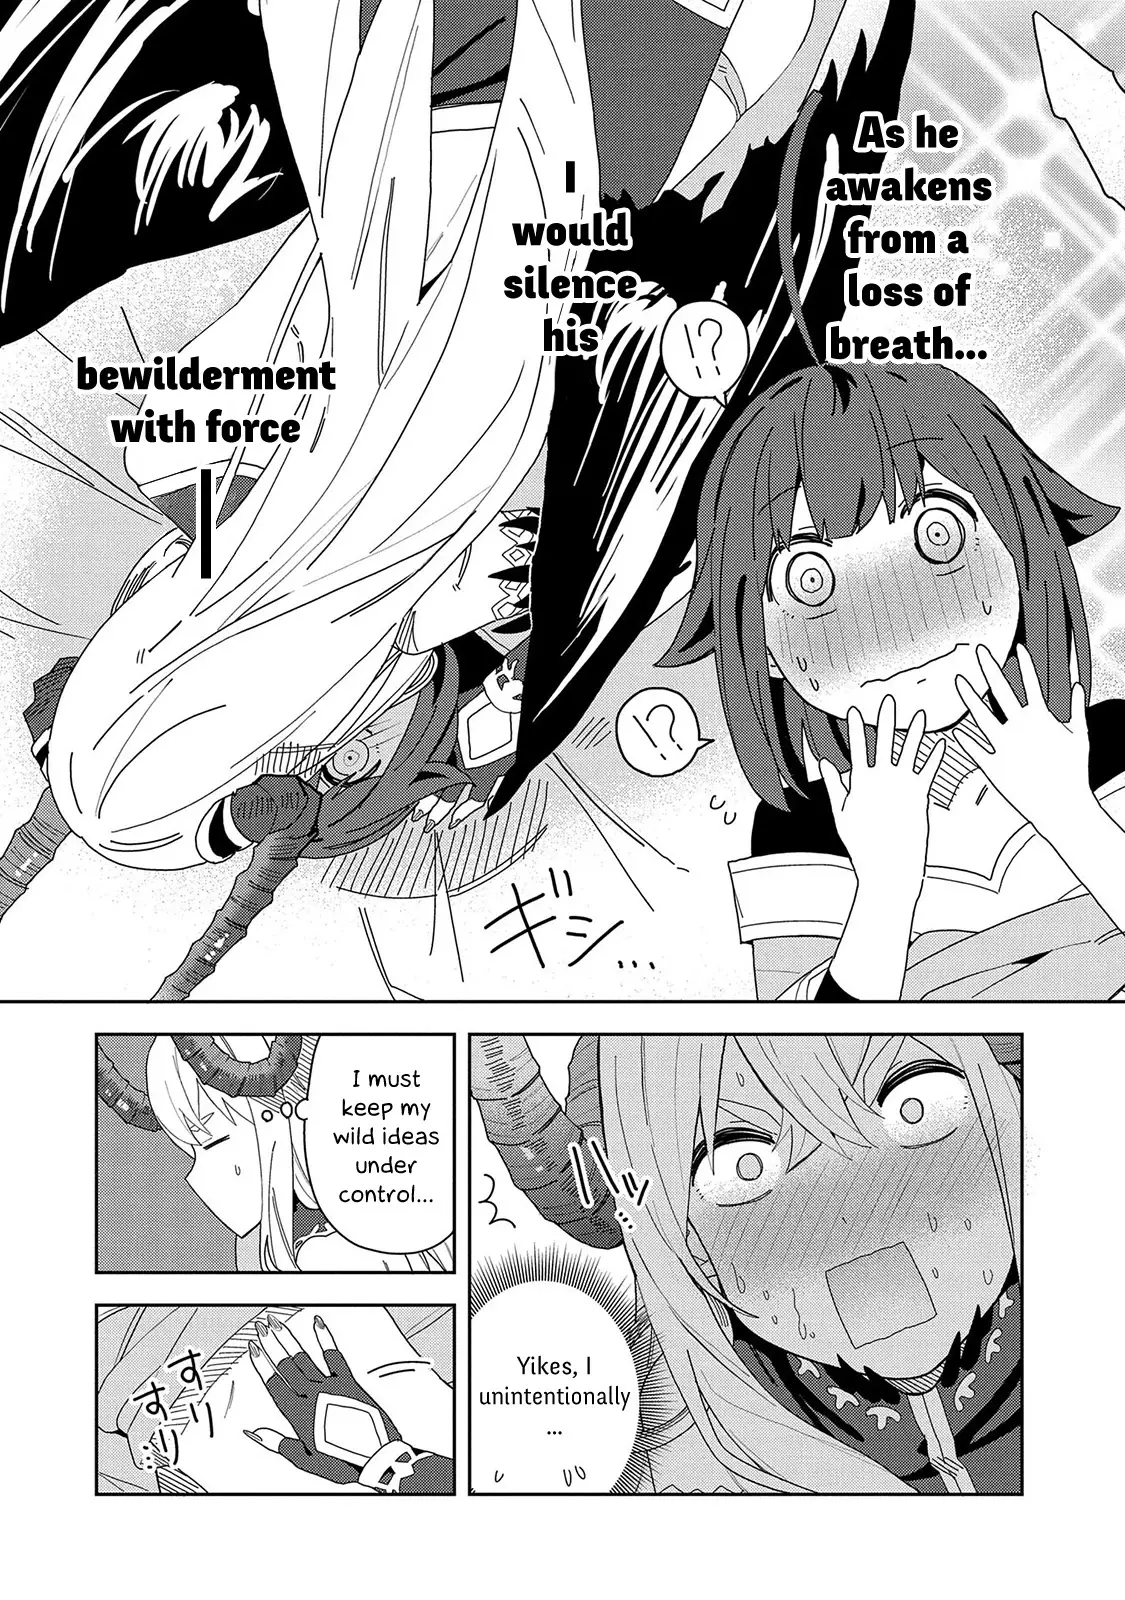 I Summoned The Devil To Grant Me A Wish, But I Married Her Instead Since She Was Adorable ~My New Devil Wife~ - 6 page 11